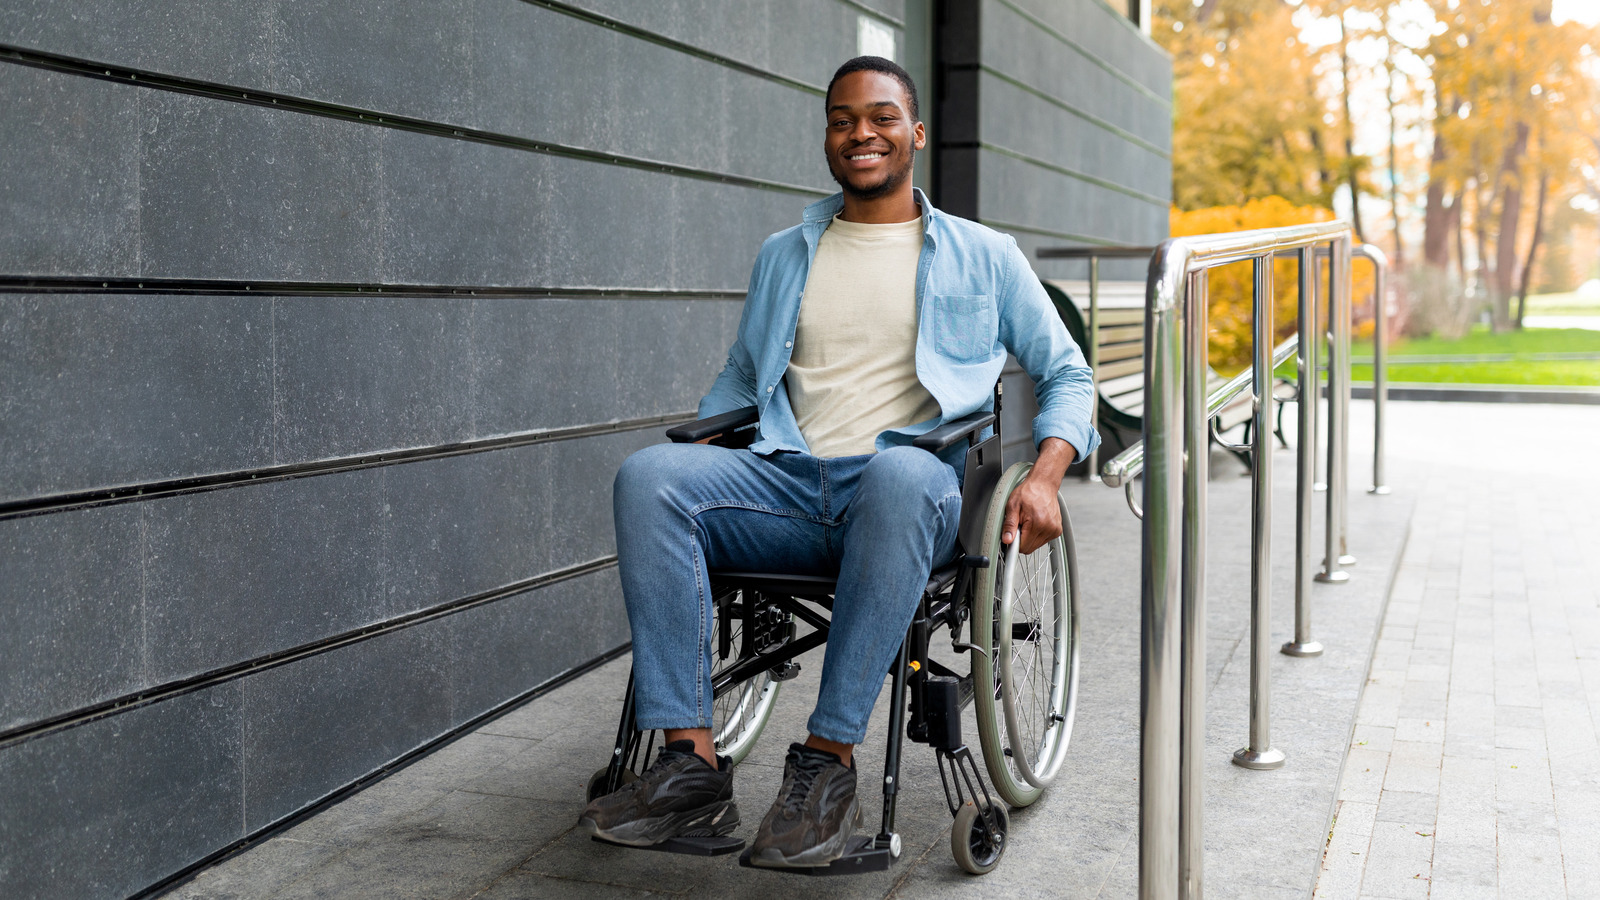 Home Depot Or Lowe's: Which Has Better Deals On Wheelchair Ramps?